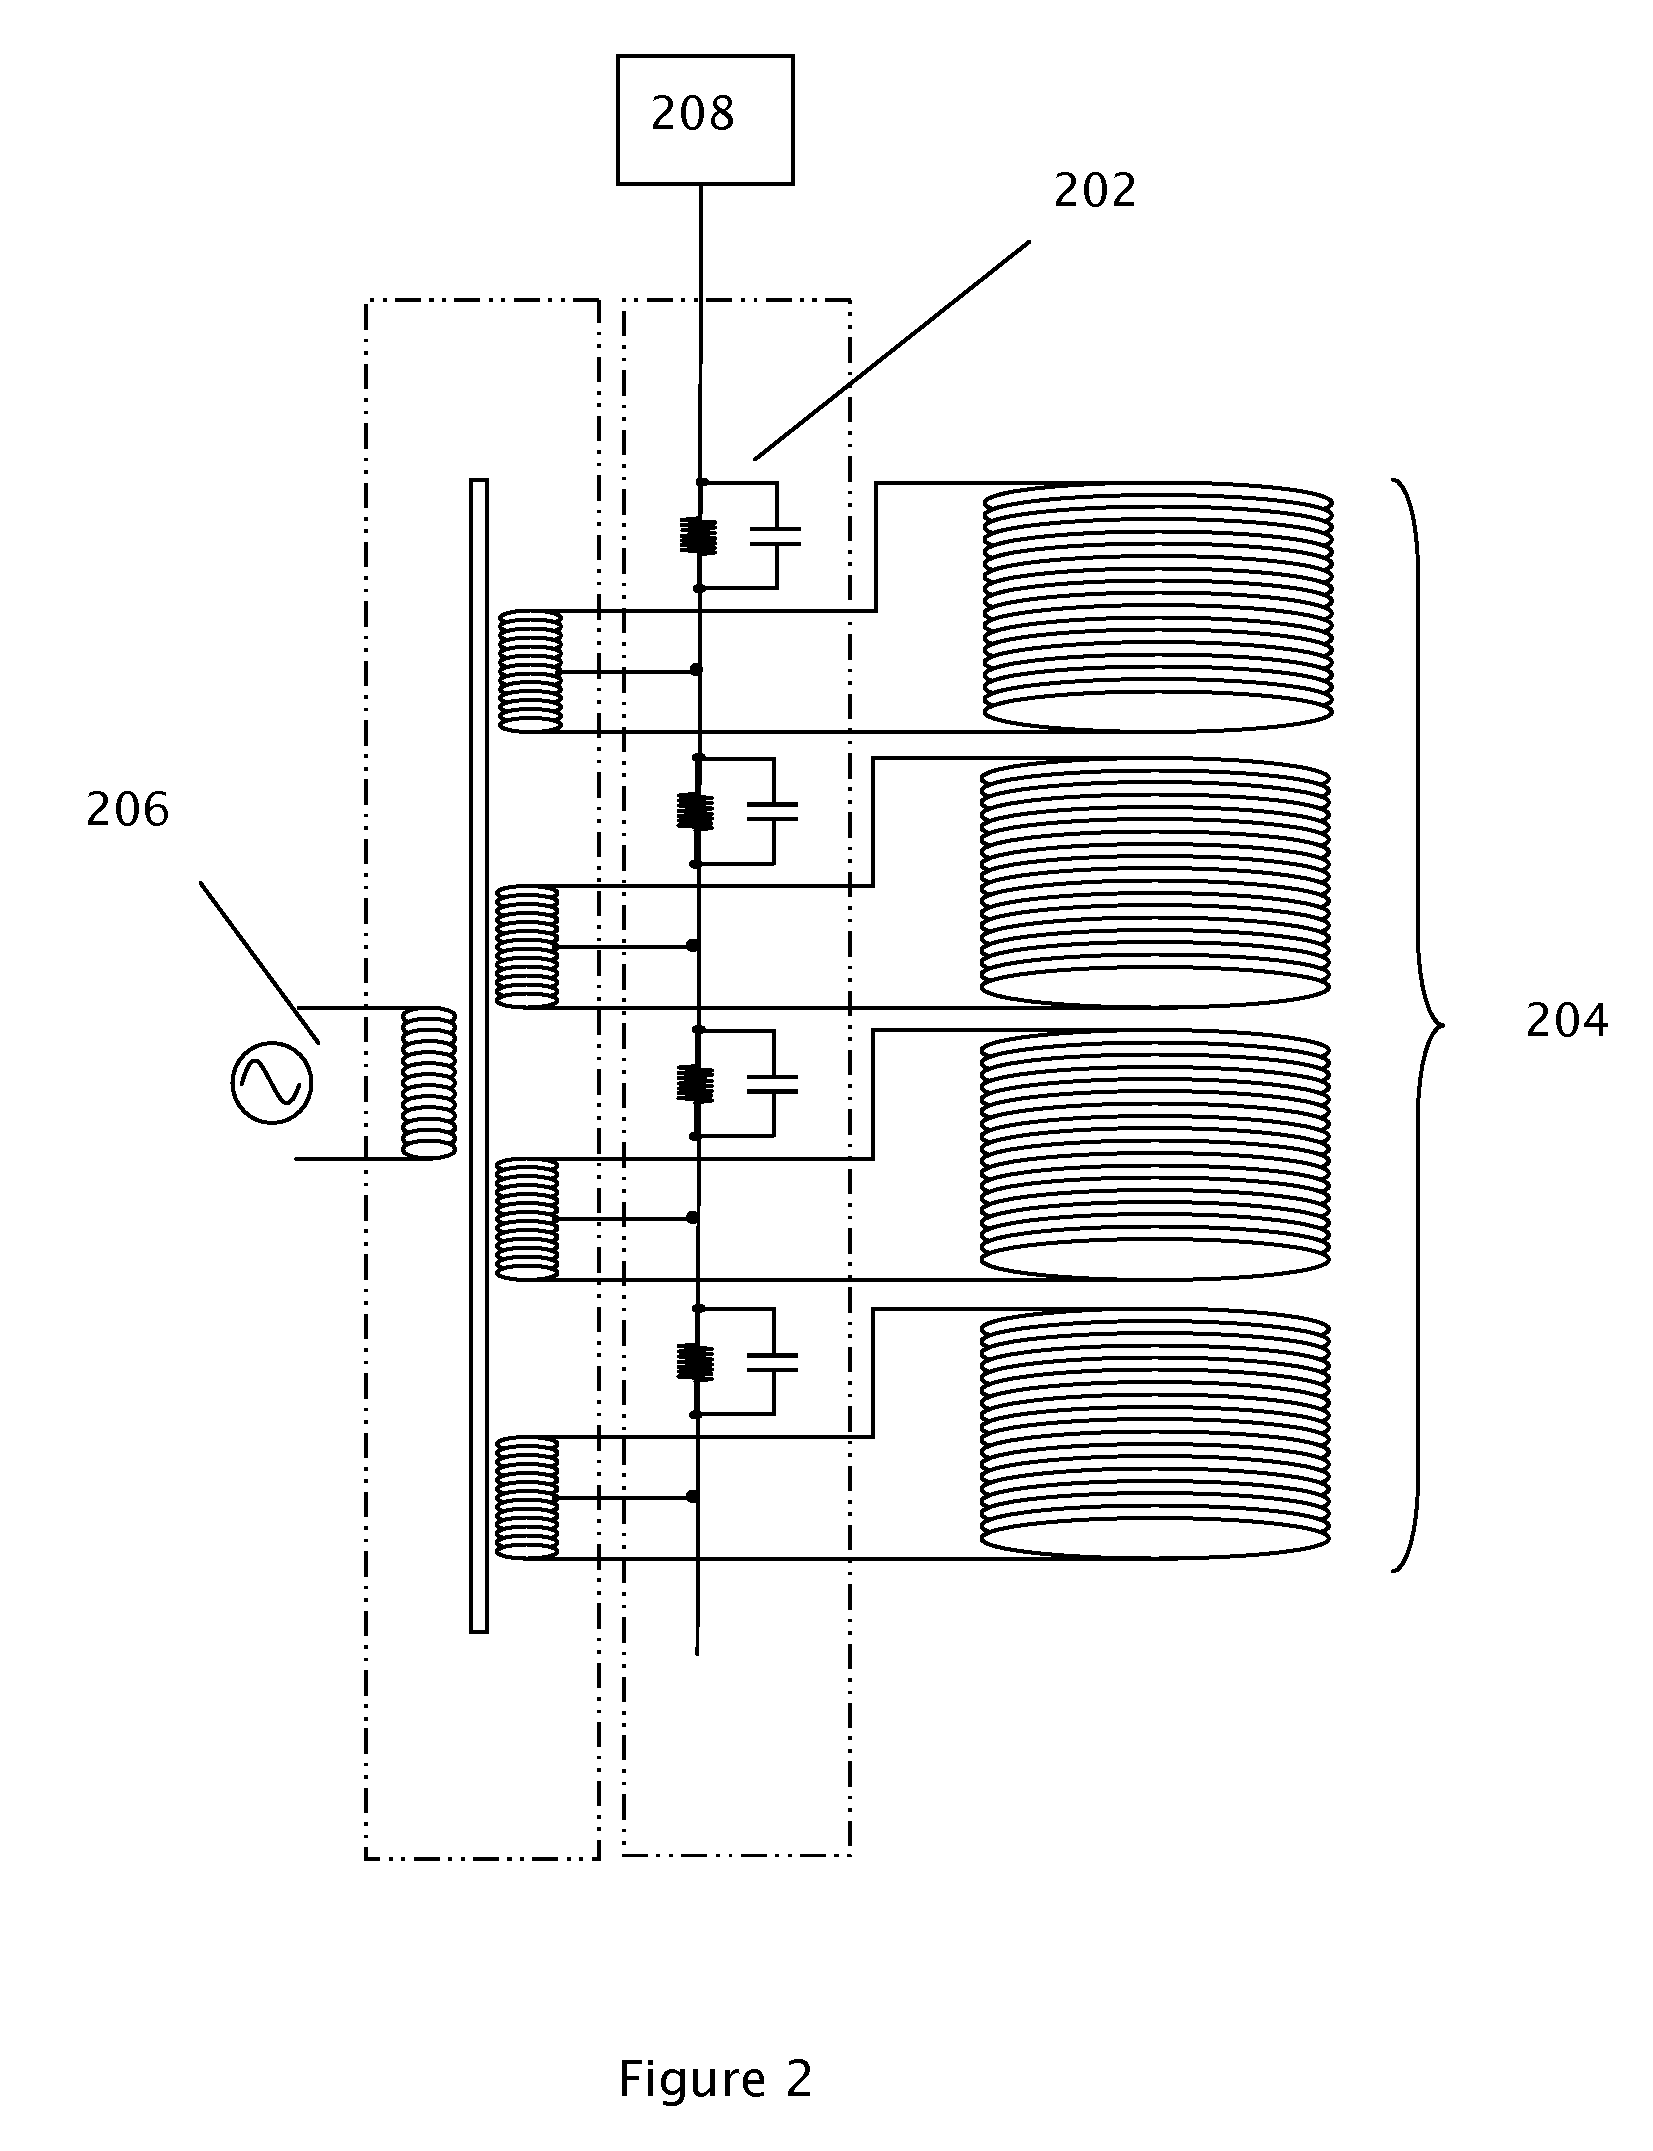 Ion mobility spectrometer apparatus and methods